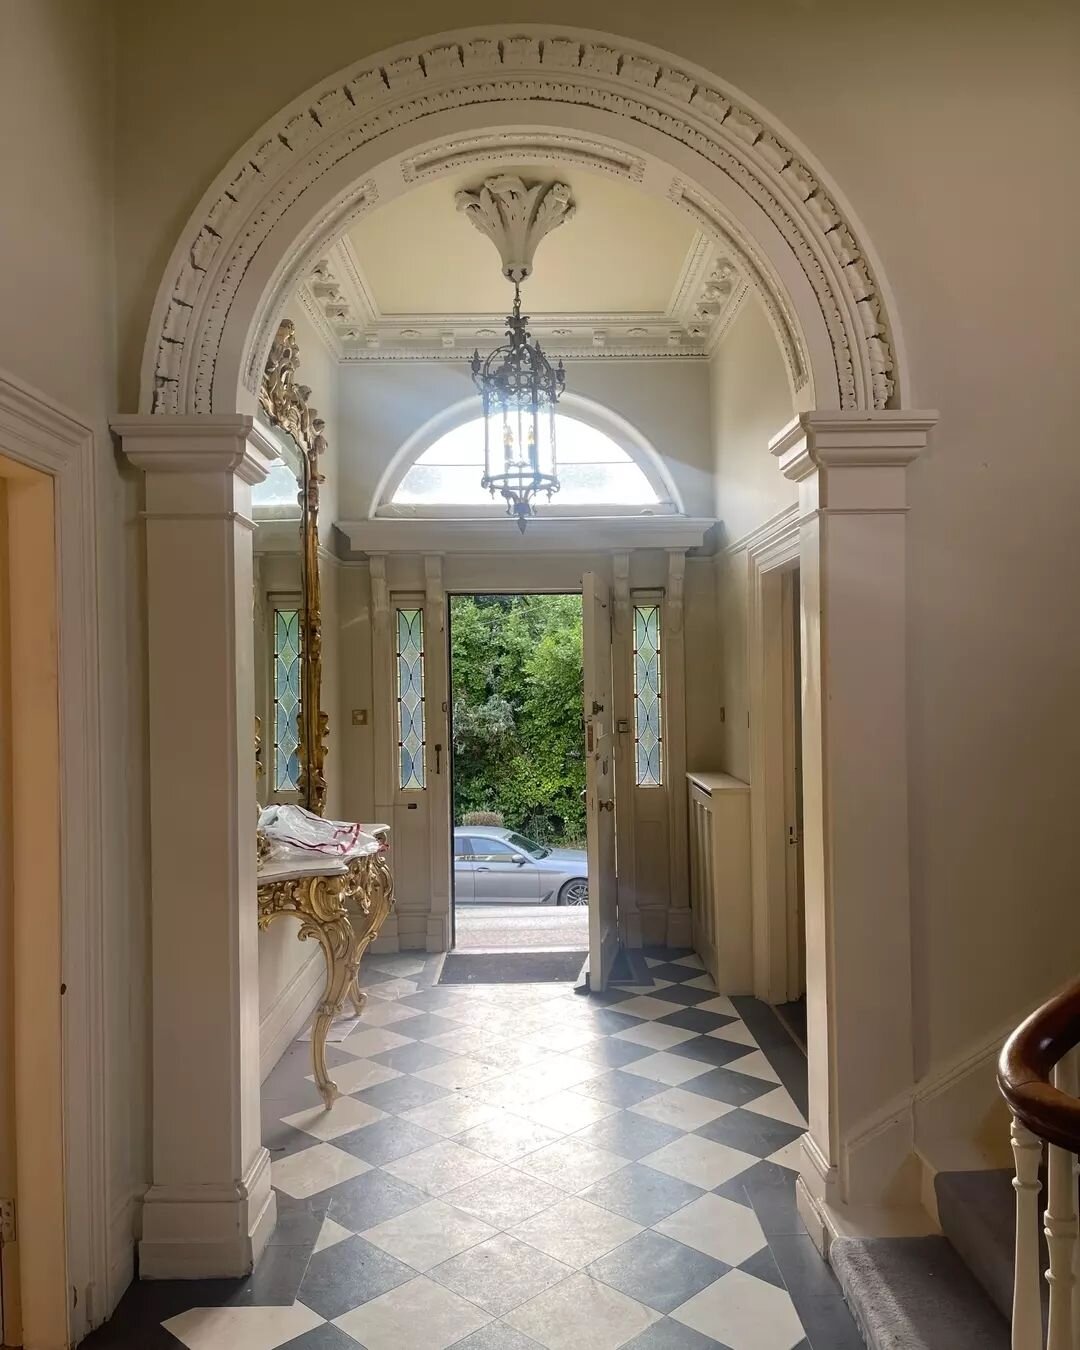 Whilst we&rsquo;ve been a bit absent here, we&rsquo;ve been busy designing and overseeing various wonderful projects in all different stages of the design process. 
This historic house project in Dublin is now on site and involves restoring the wonde